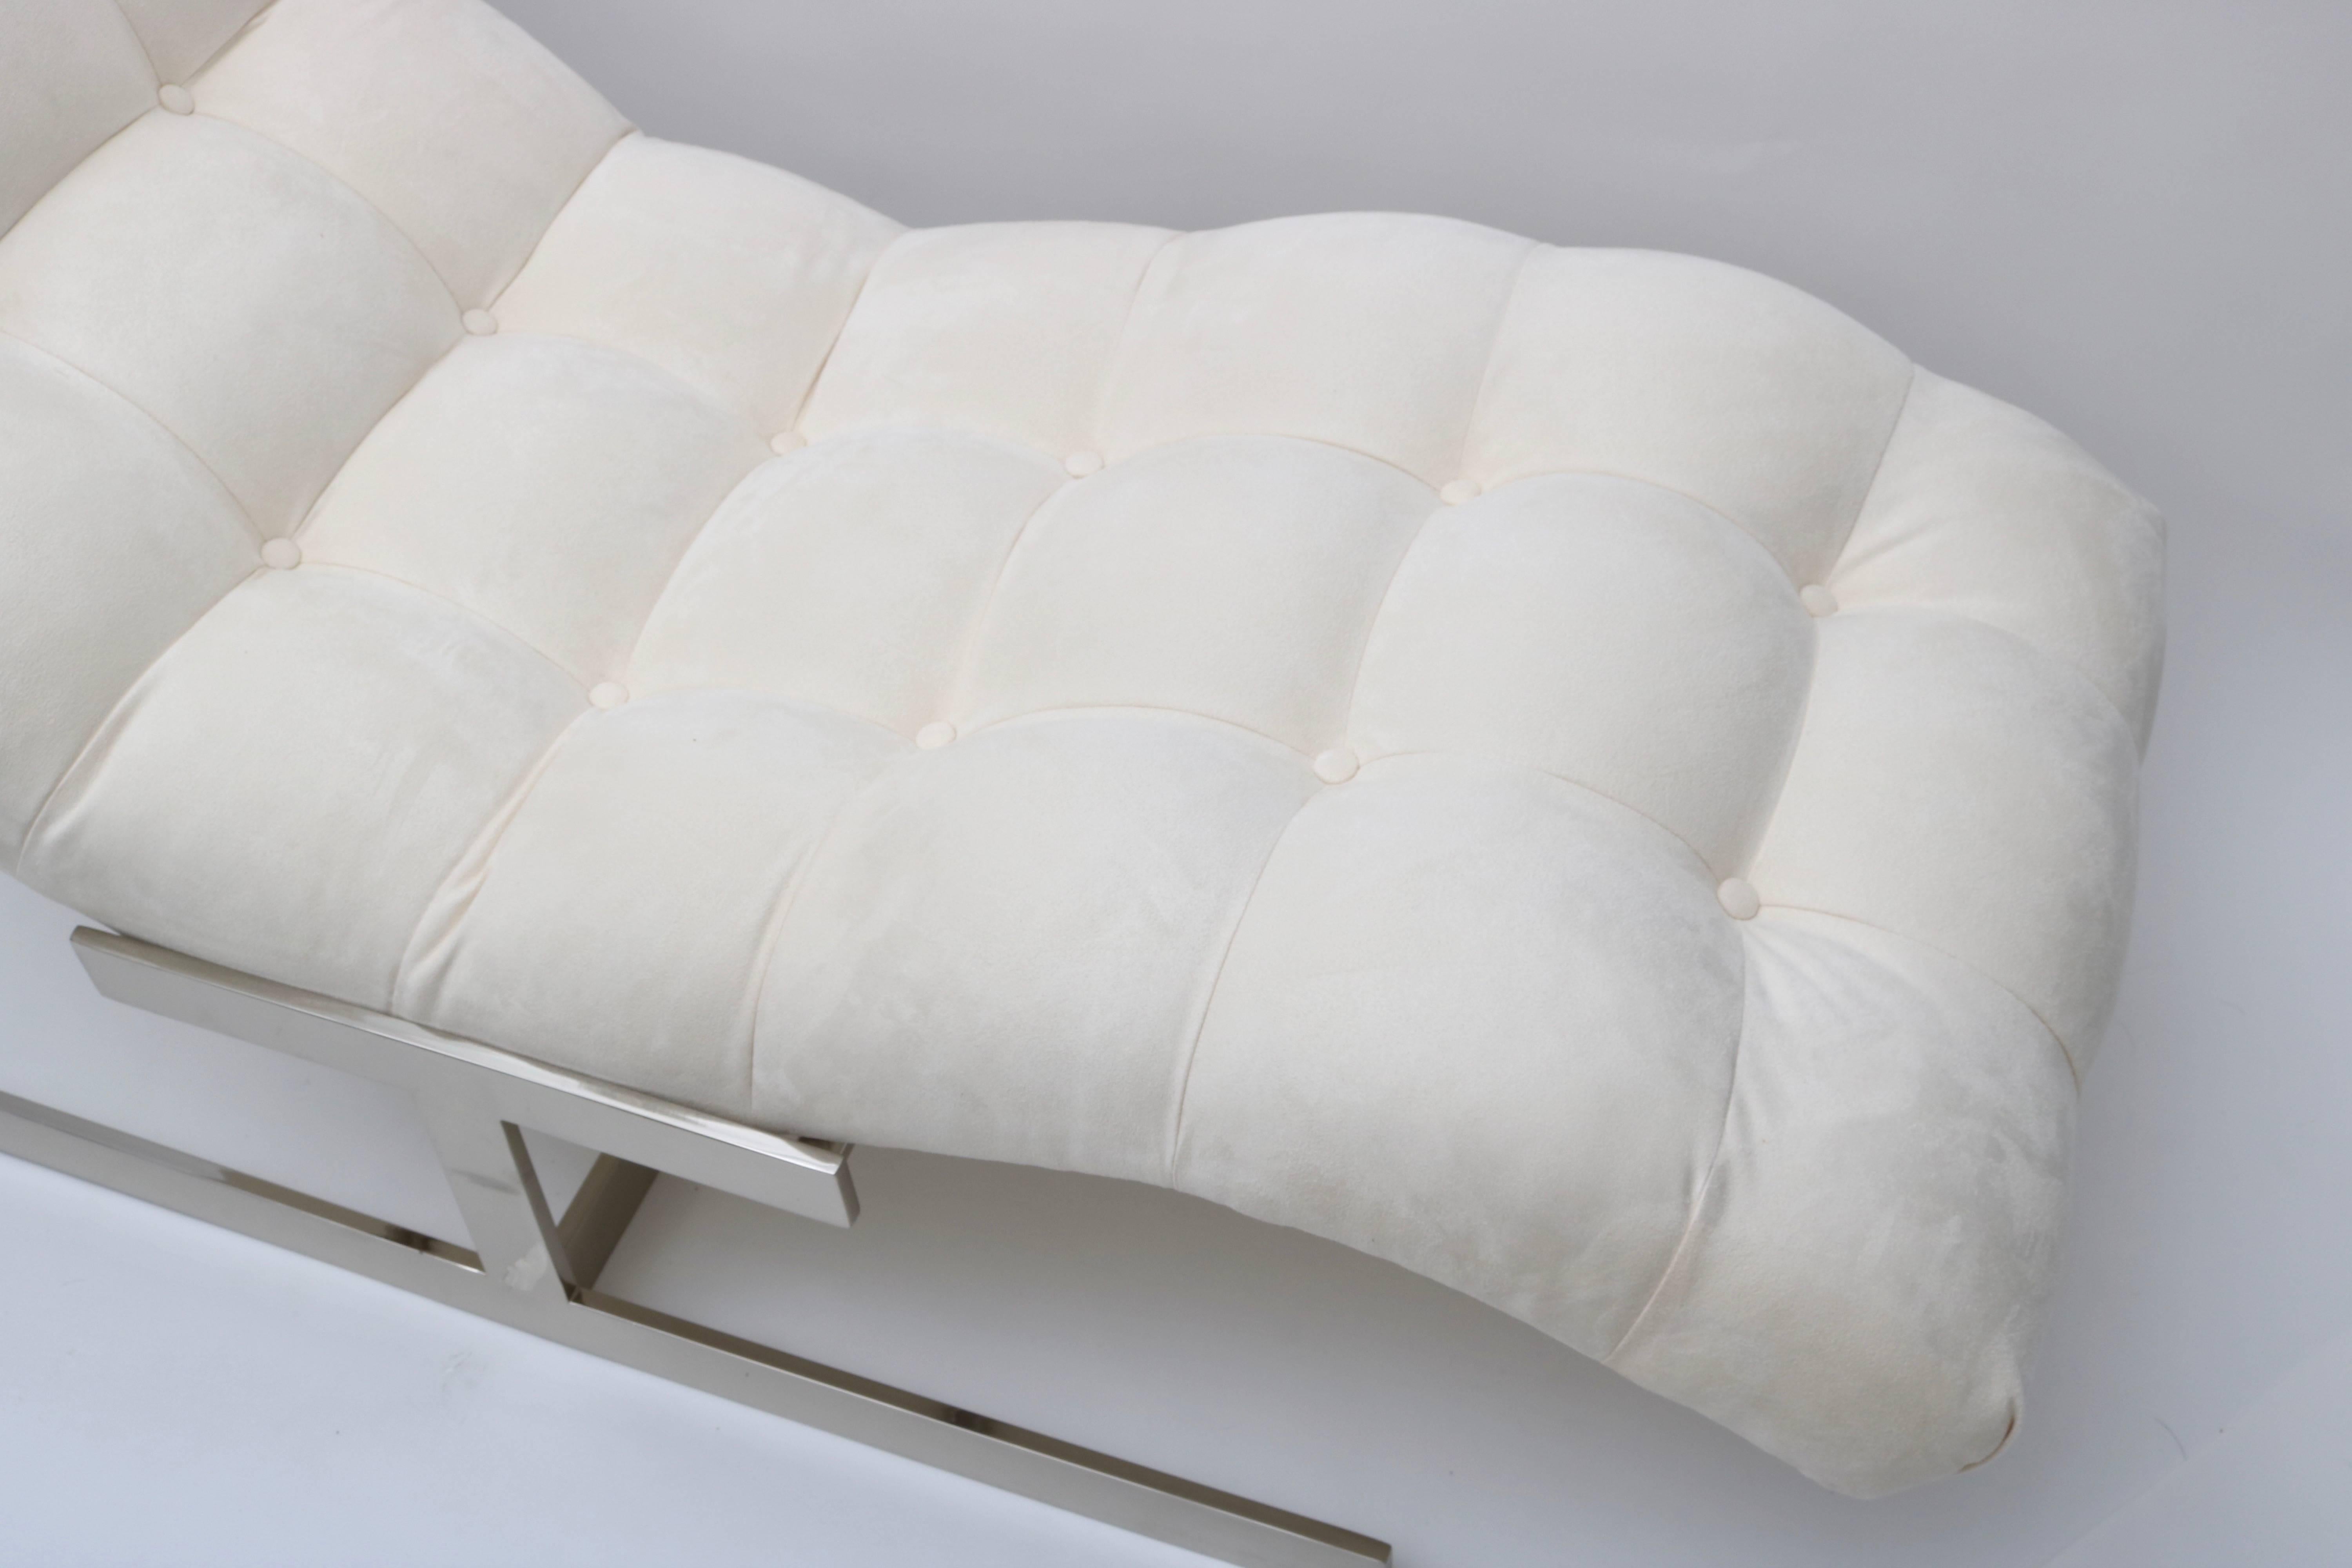 This stylish "Wave" chaise was designed in the manner of Milo Baughman for his flat-bar collection and has recently been professionally rebuilt and upholstered in white ultra-suede.

For best net trade price or additional questions